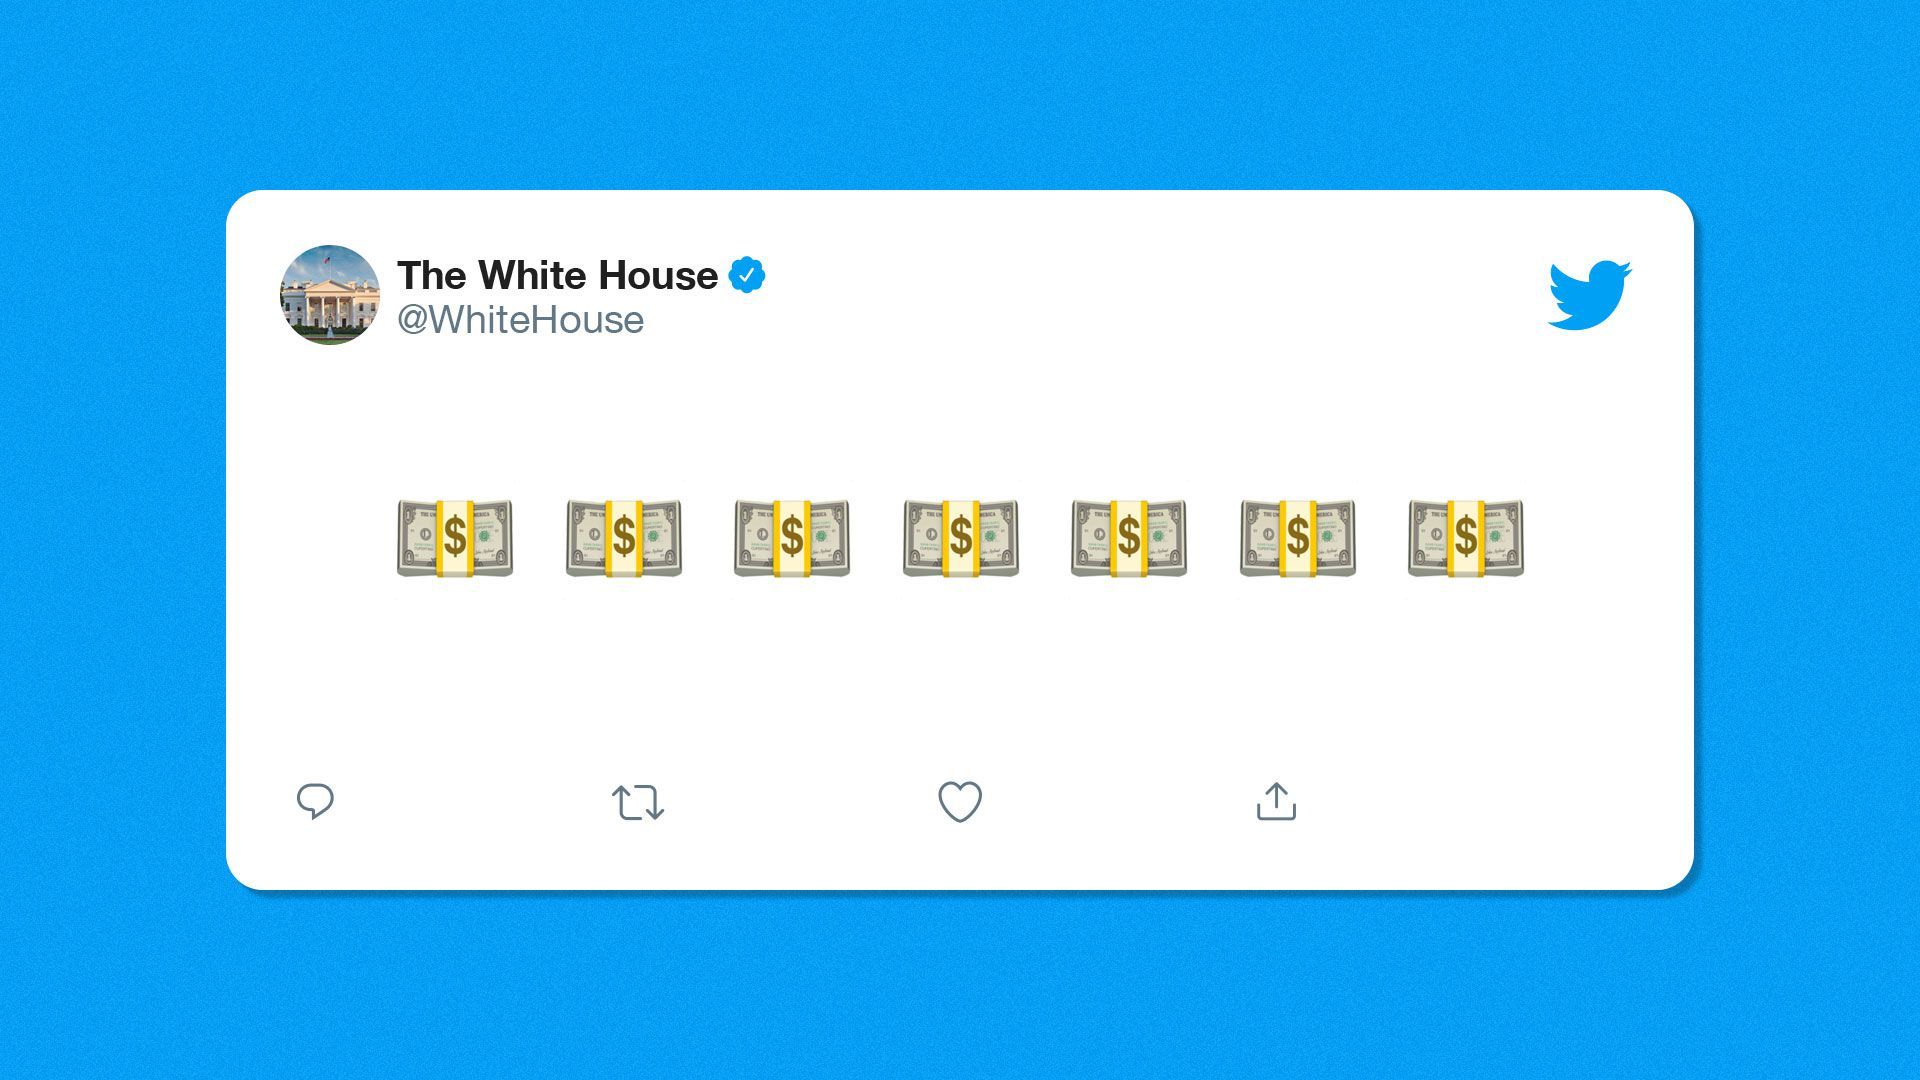 Illustration of White House twitter account with cash emojis